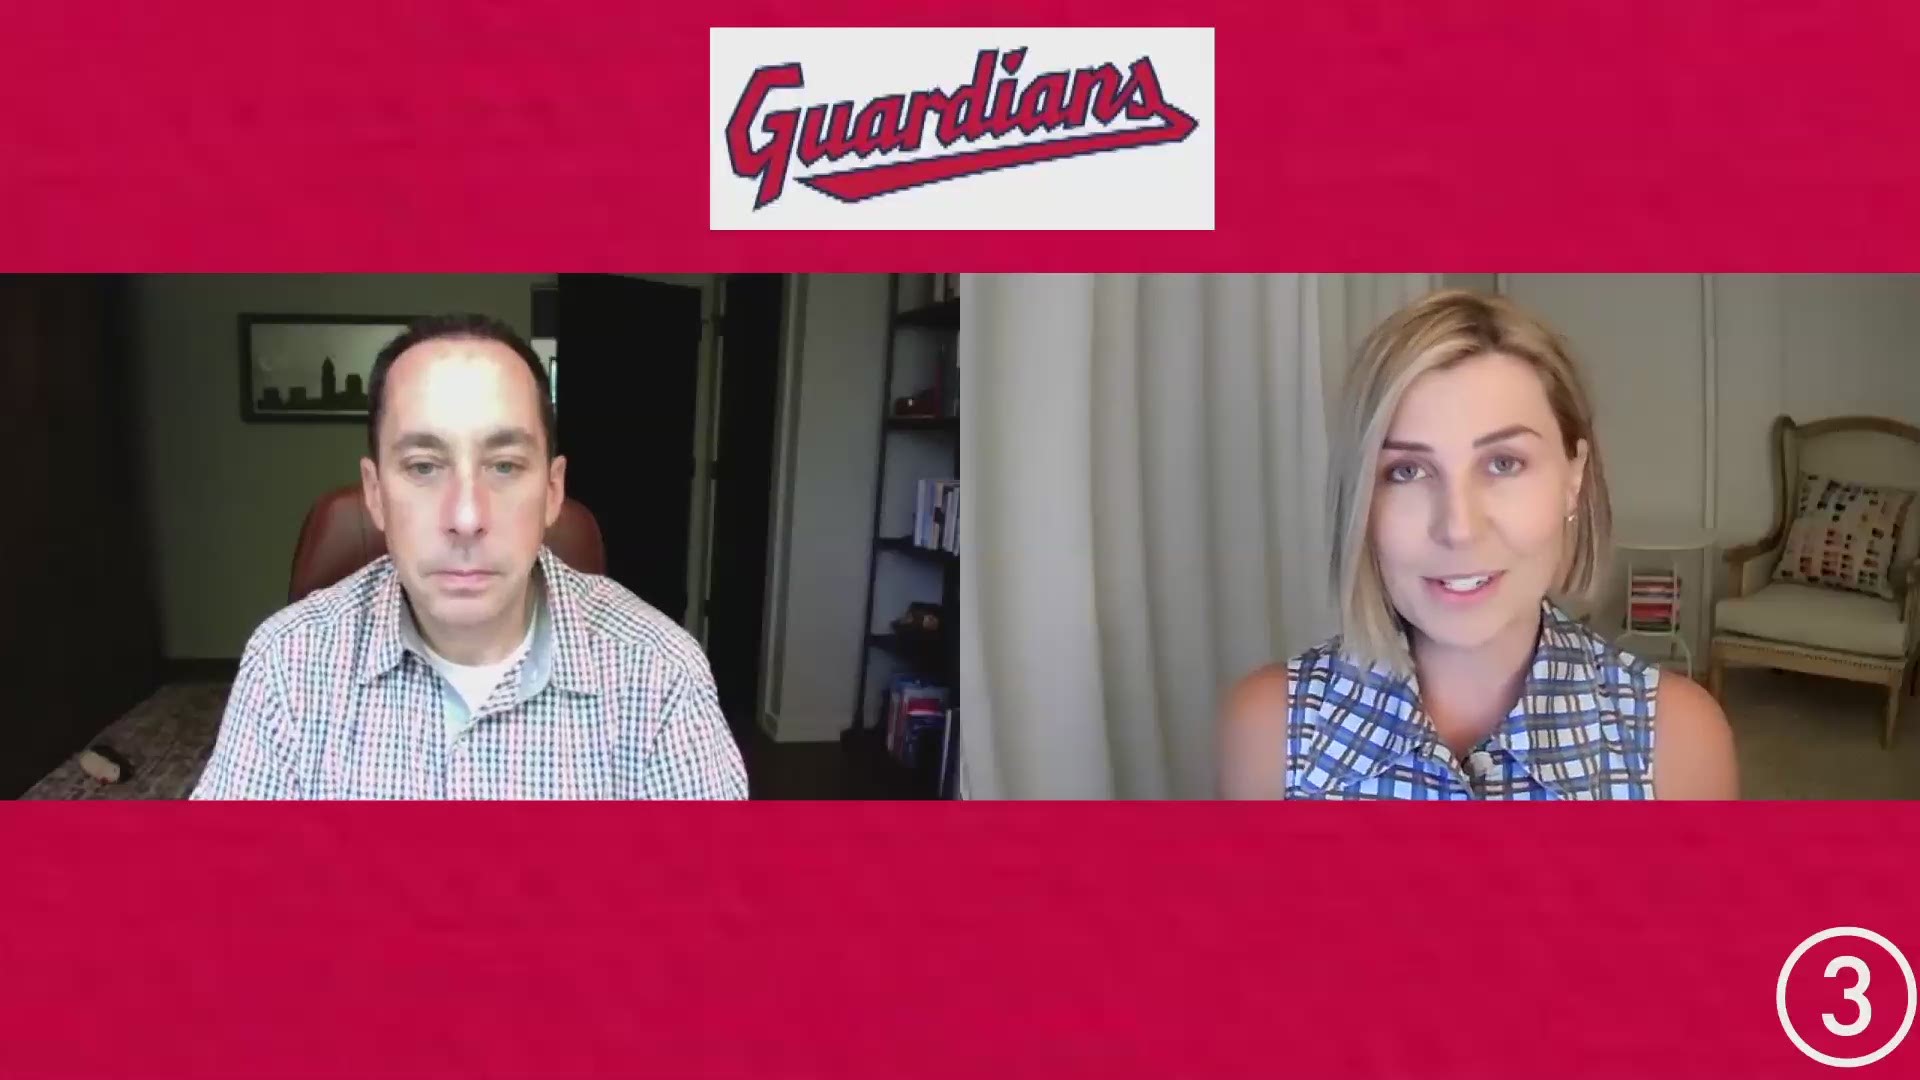 Cleveland Guardians: Indians no more, new website, Twitter handle